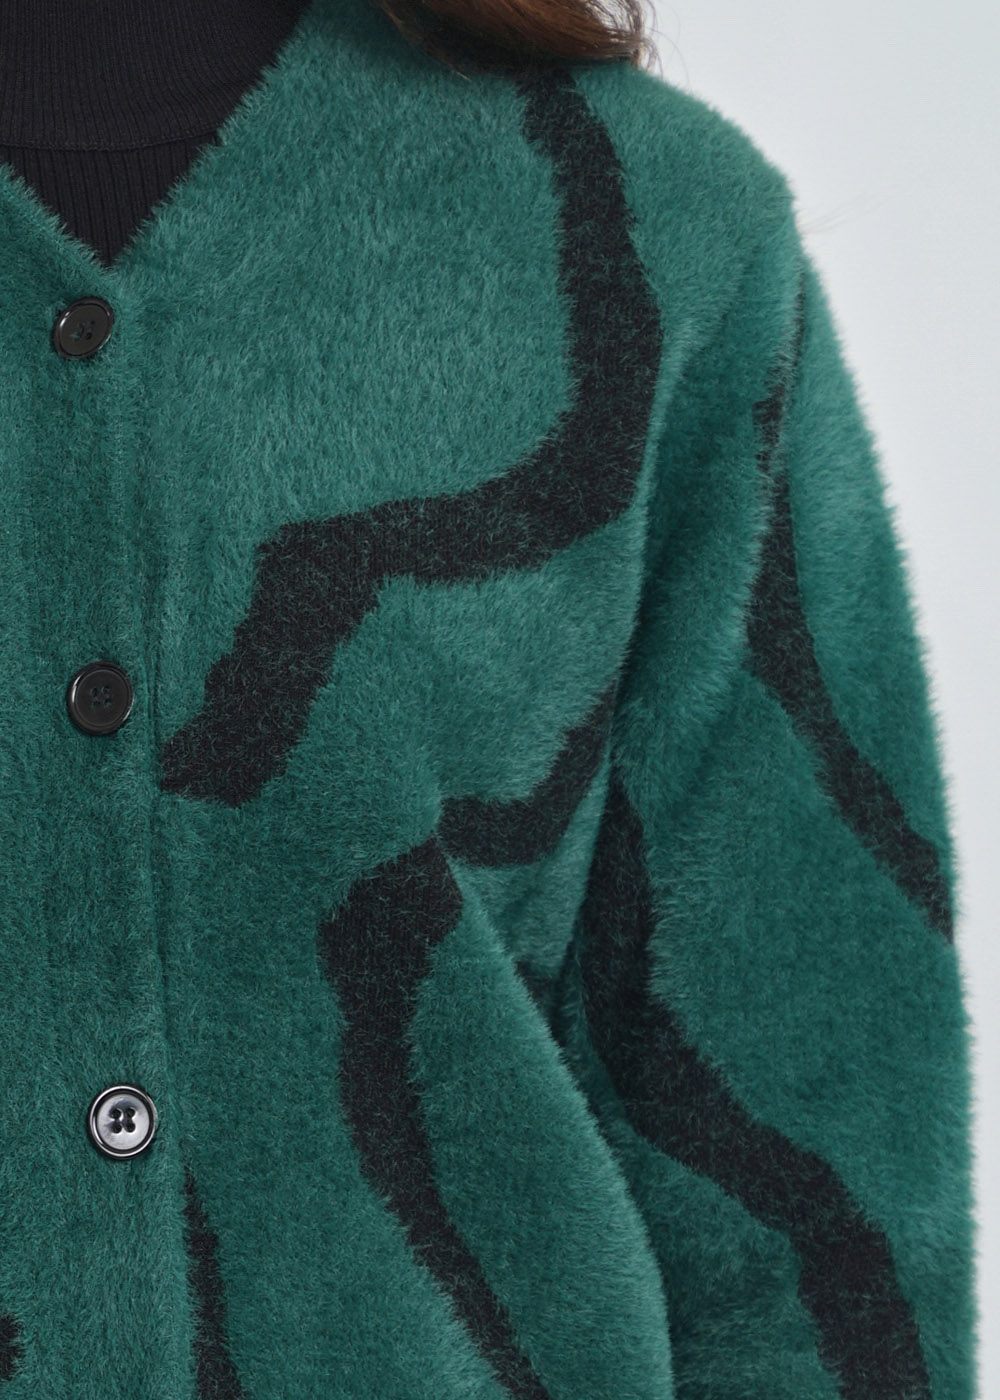 Green Cardigan Comfort: Soft Furry Knit with V-Neck Design